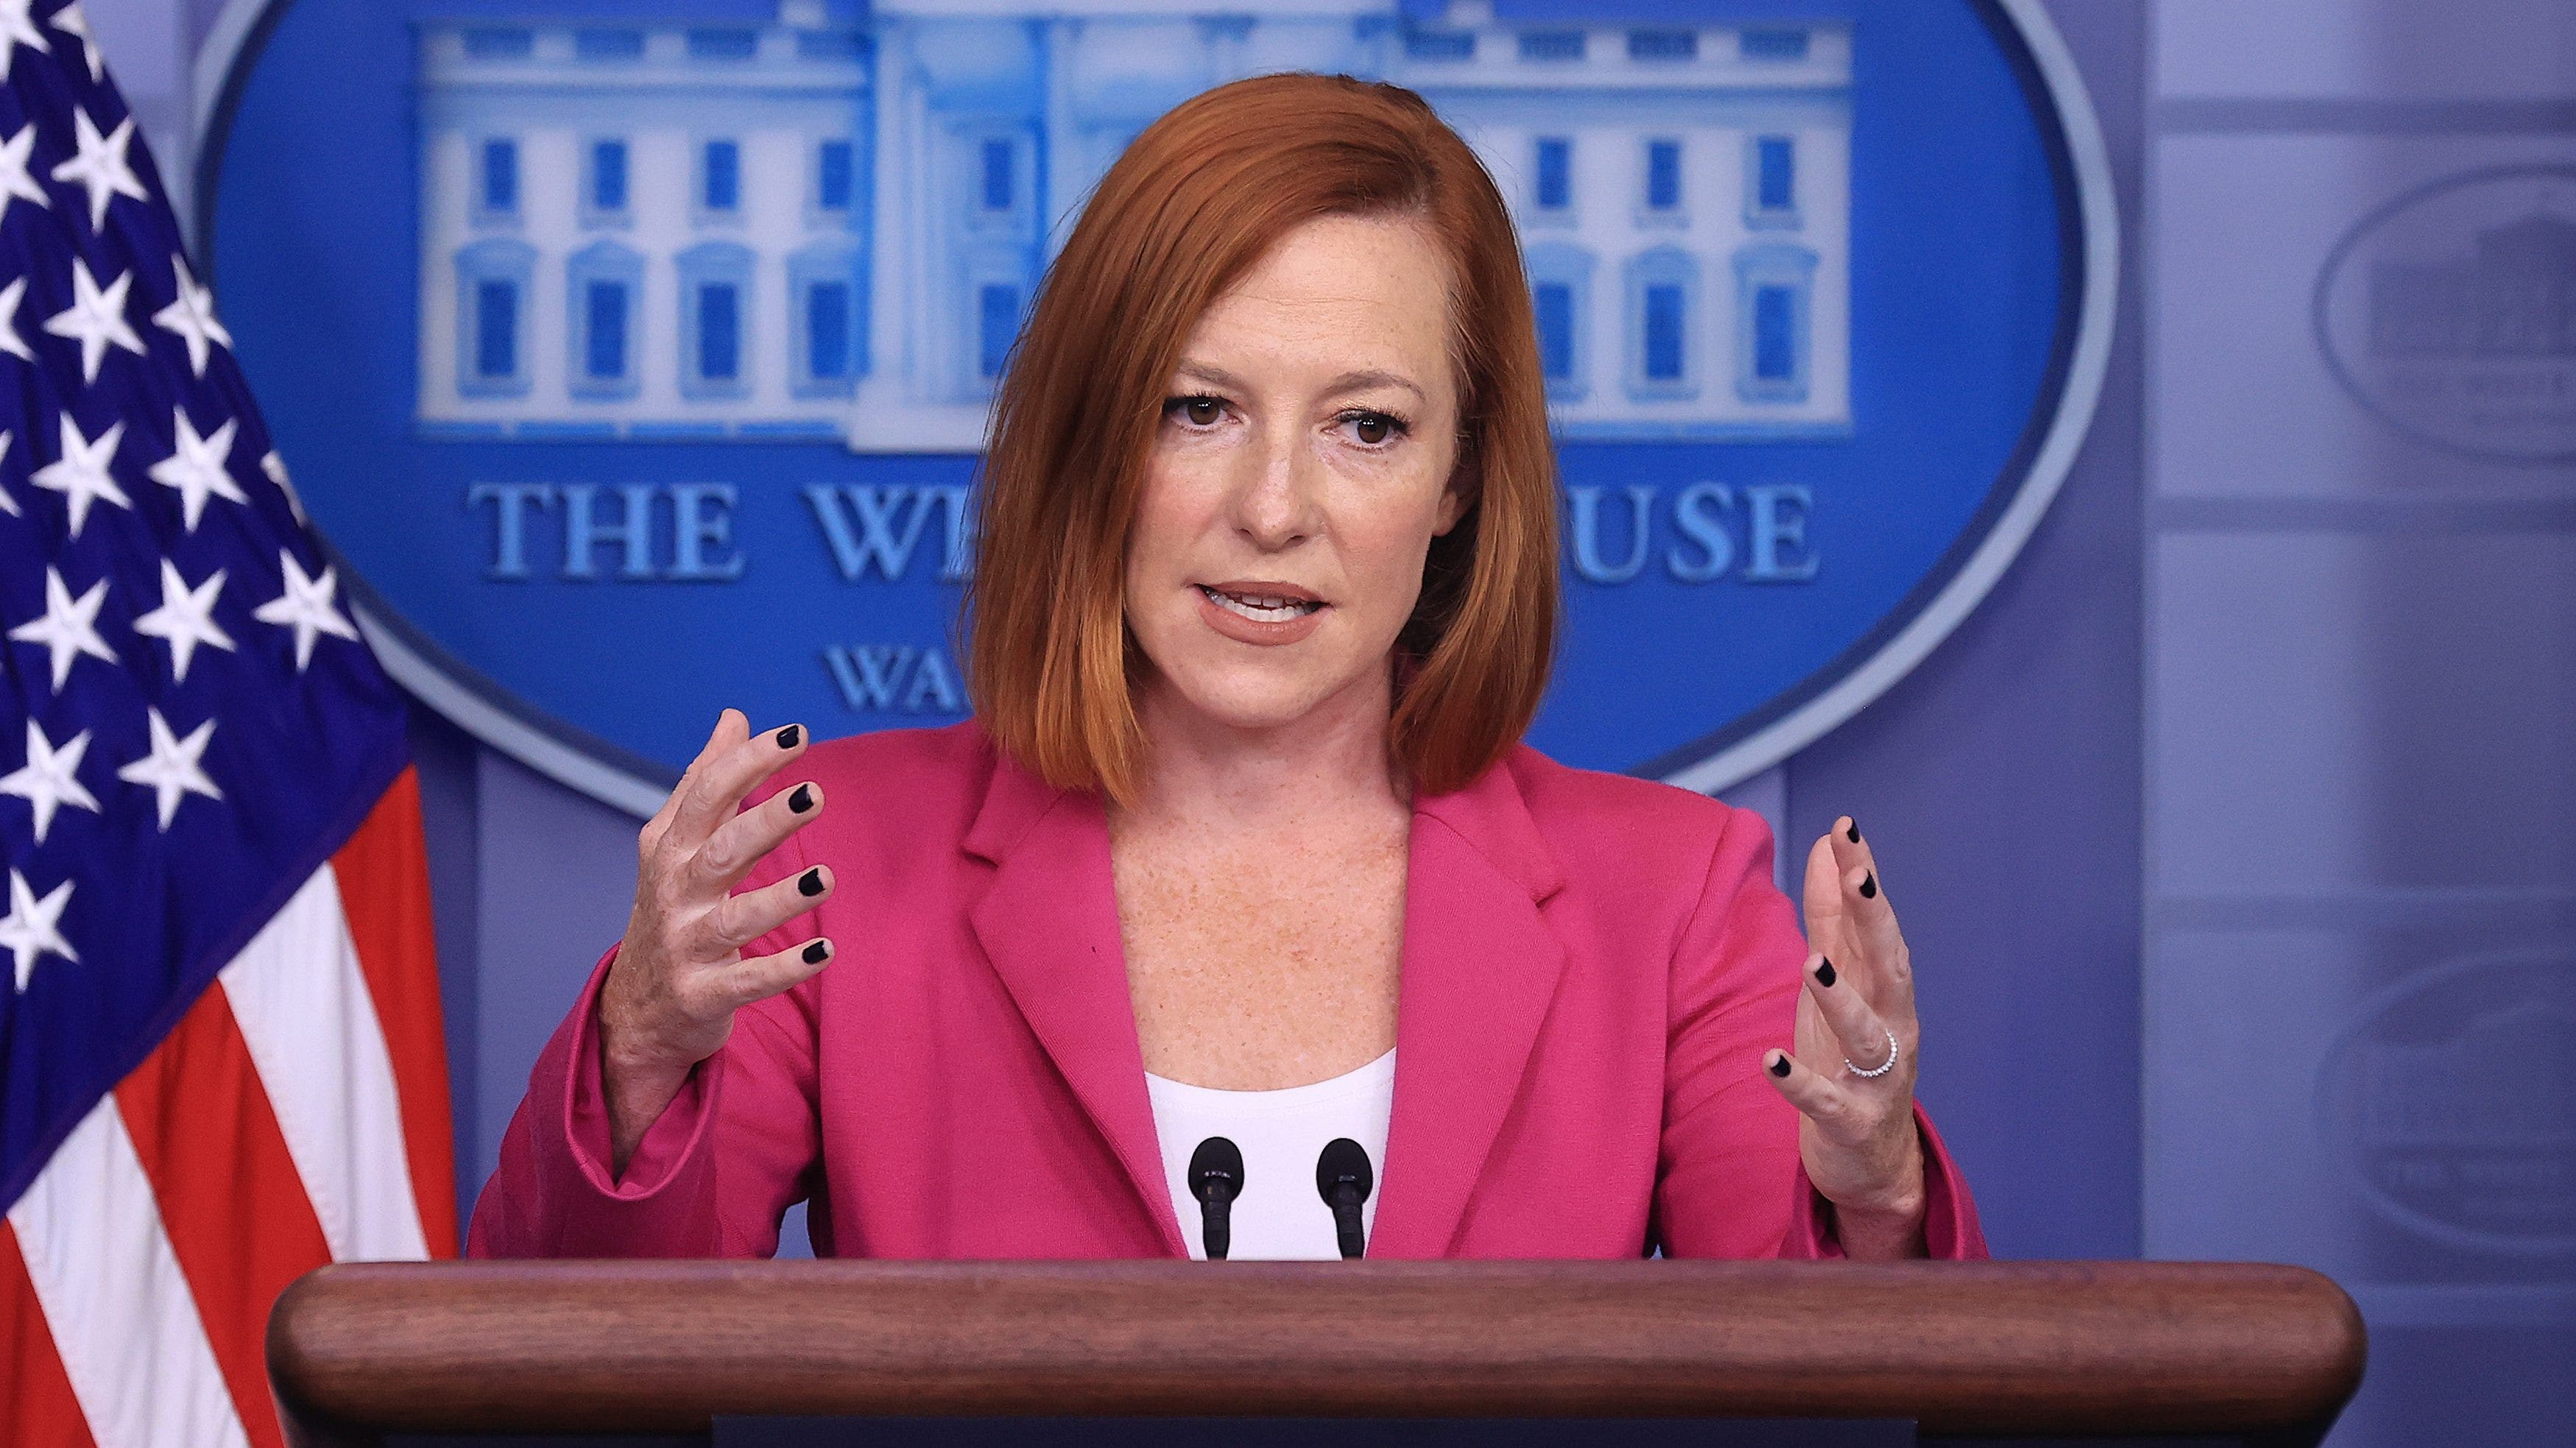 Biden border absence defended by Psaki, who says he made a 'drive through' in 2008